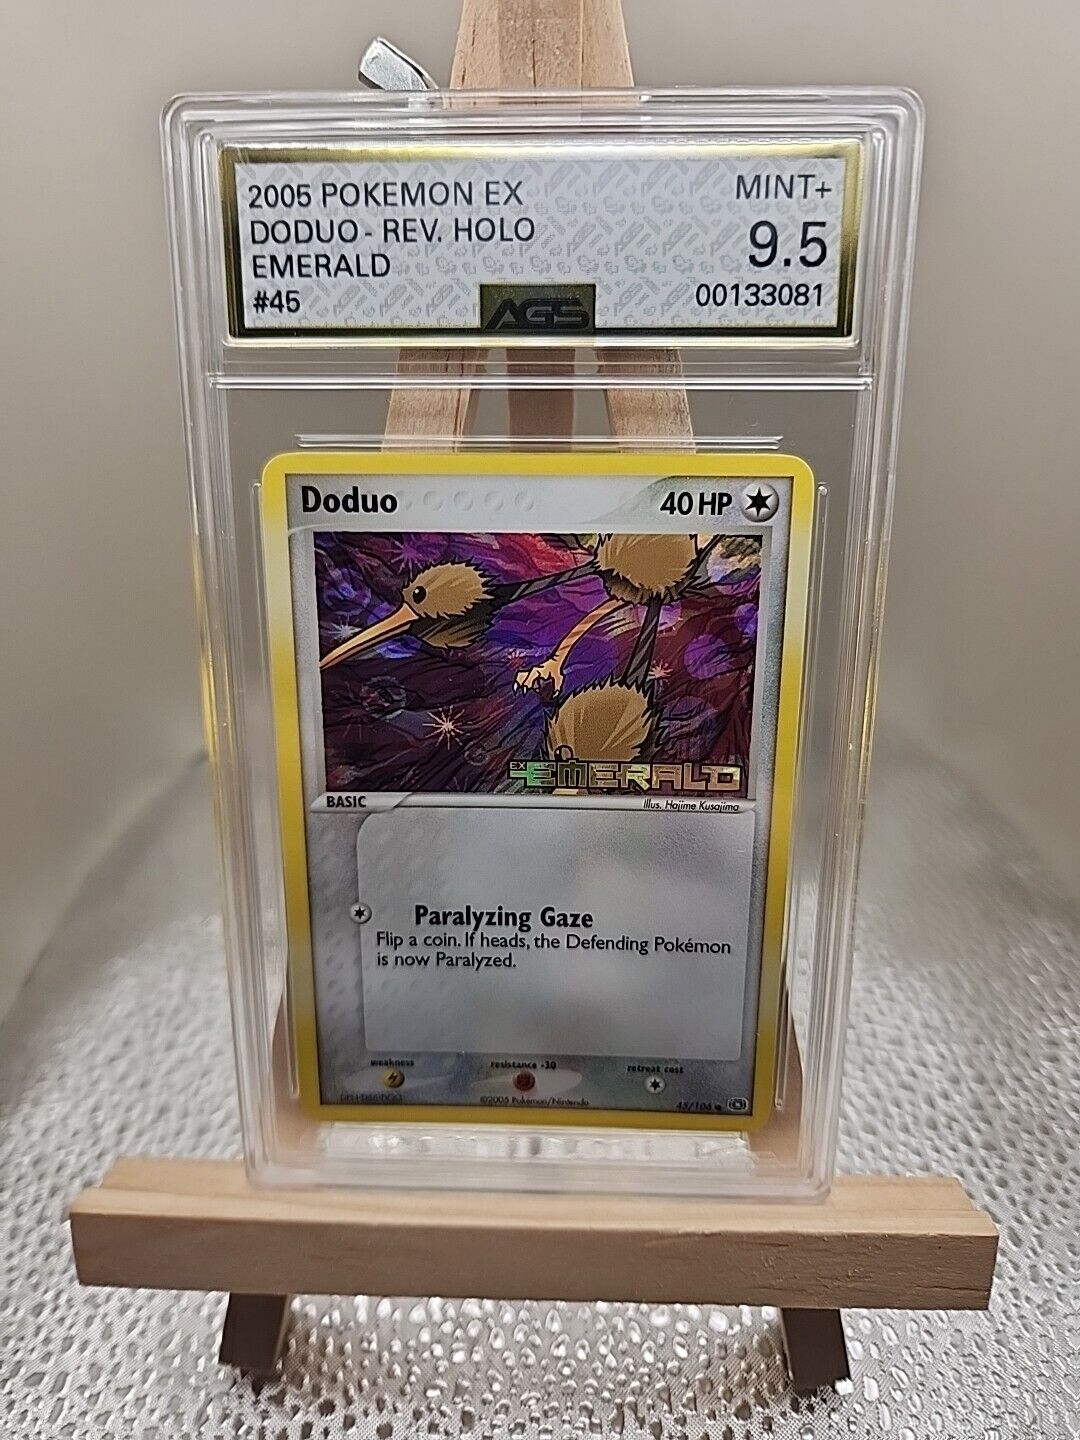 AGS 9.5 MINT+ *GOLD LABEL* Pokemon TCG Doduo Reverse Holo 45/106 Emerald Stamp